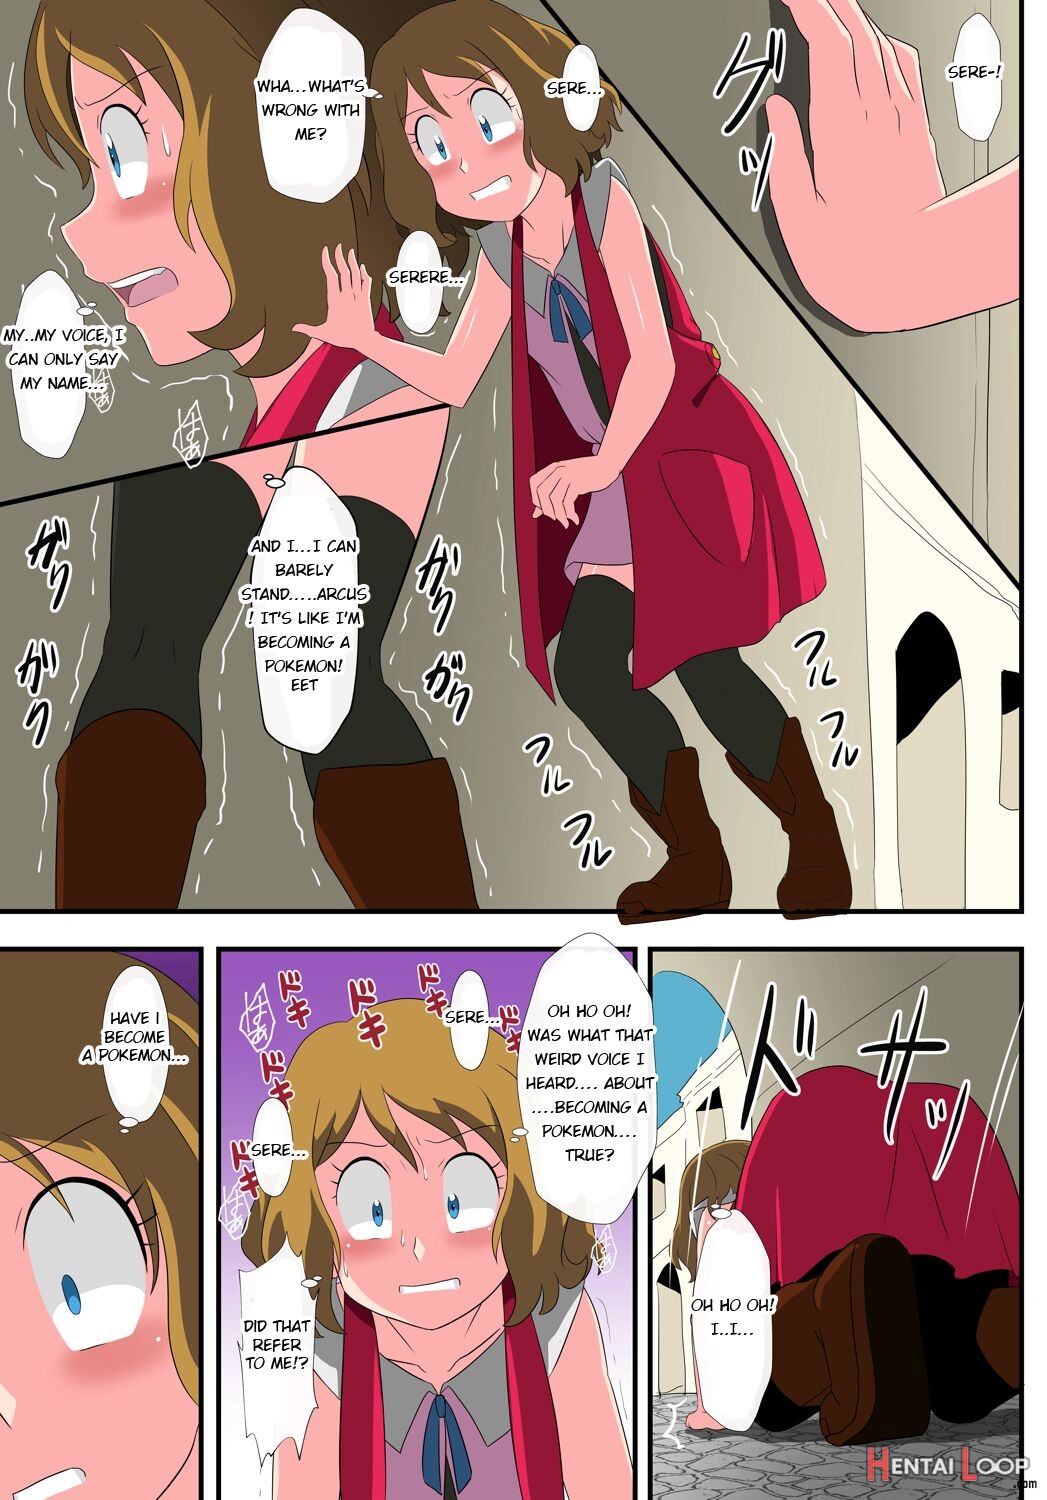 Book Of Serena: They Thought I Was A Pokemon And Captured Me! page 3